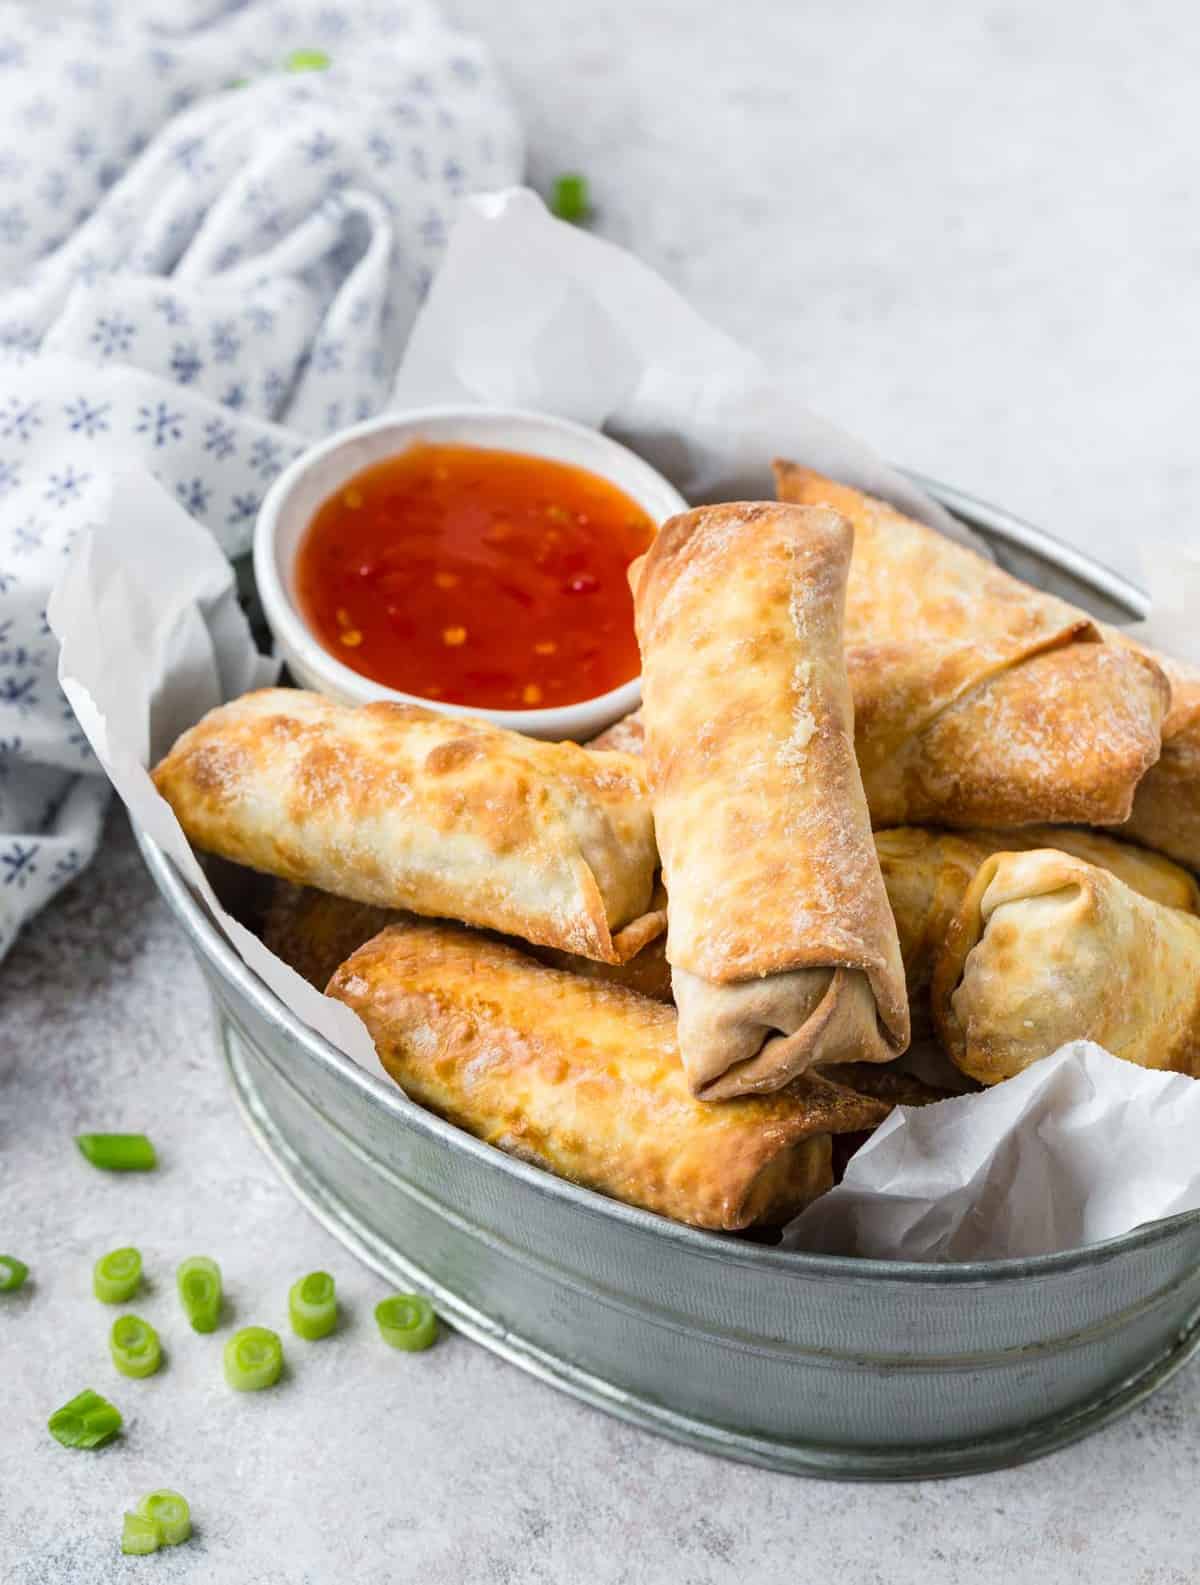 Egg rolls in a metal basket with dipping sauce.